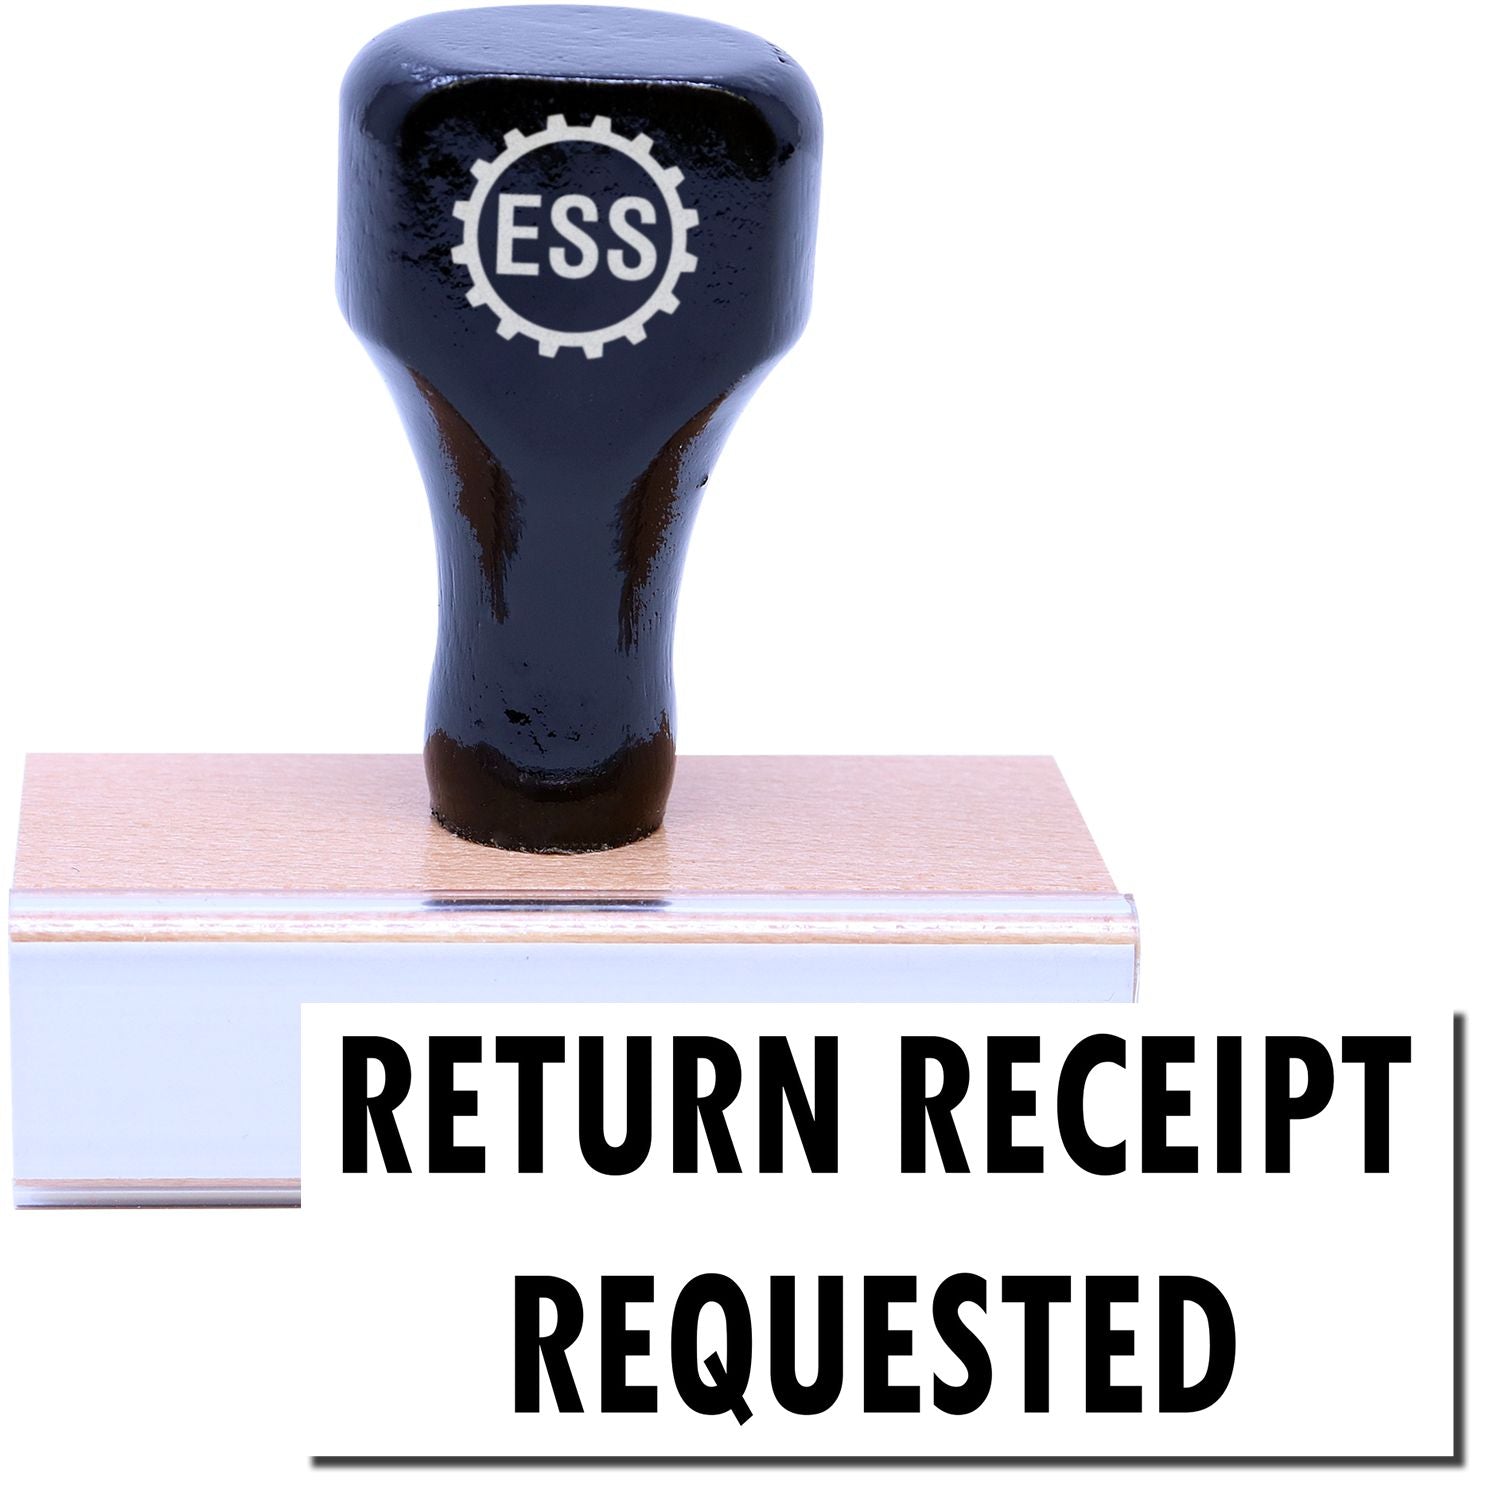 A stock office rubber stamp with a stamped image showing how the text "RETURN RECEIPT REQUESTED" in a large font is displayed after stamping.